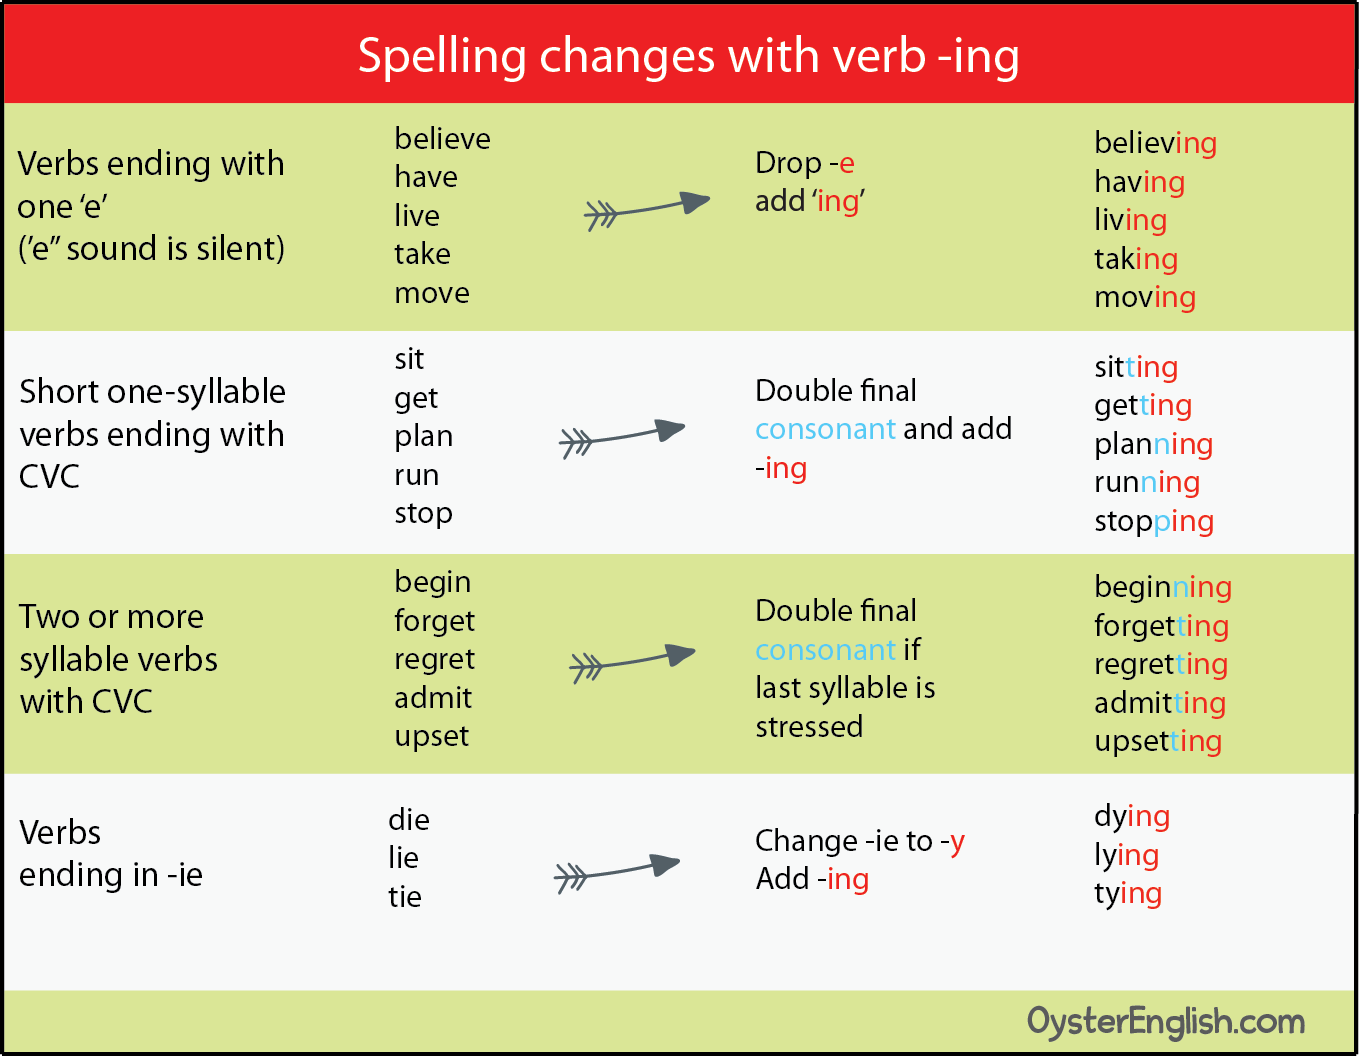 A chart showing the spelling changes shown on the page